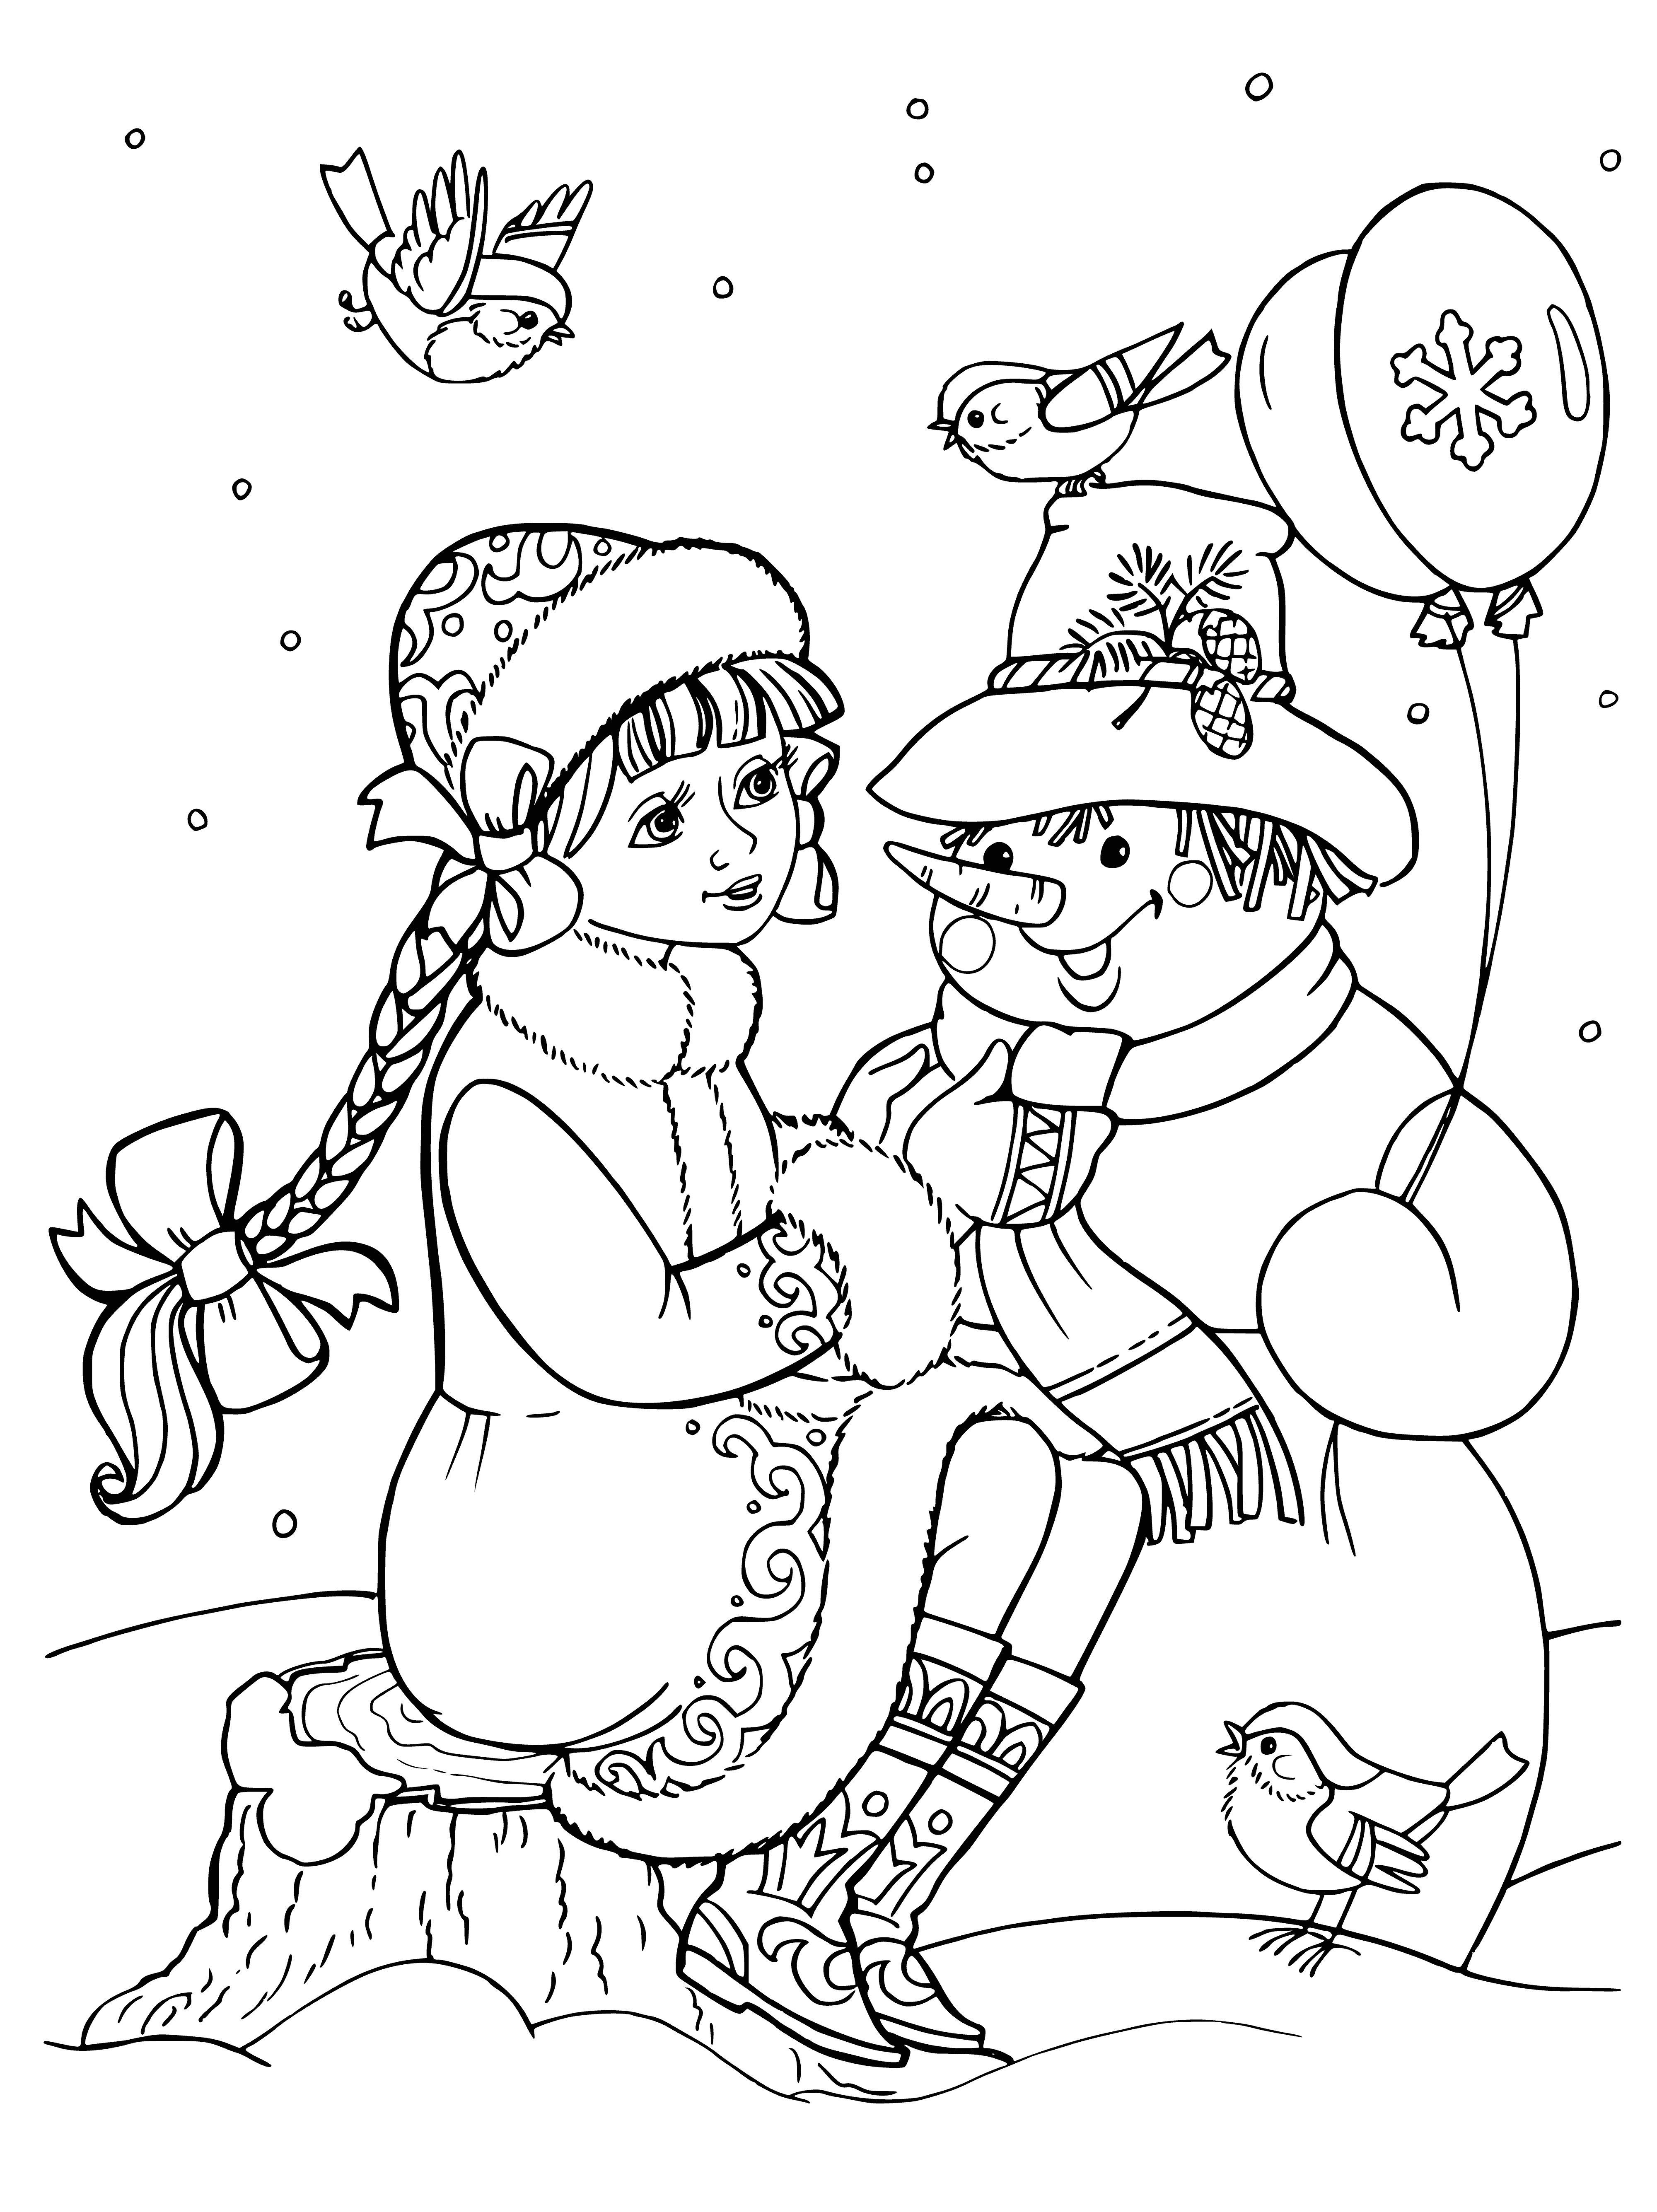 coloring page: Girl decorates snowman with black scarf, hat & broom in coloring page.